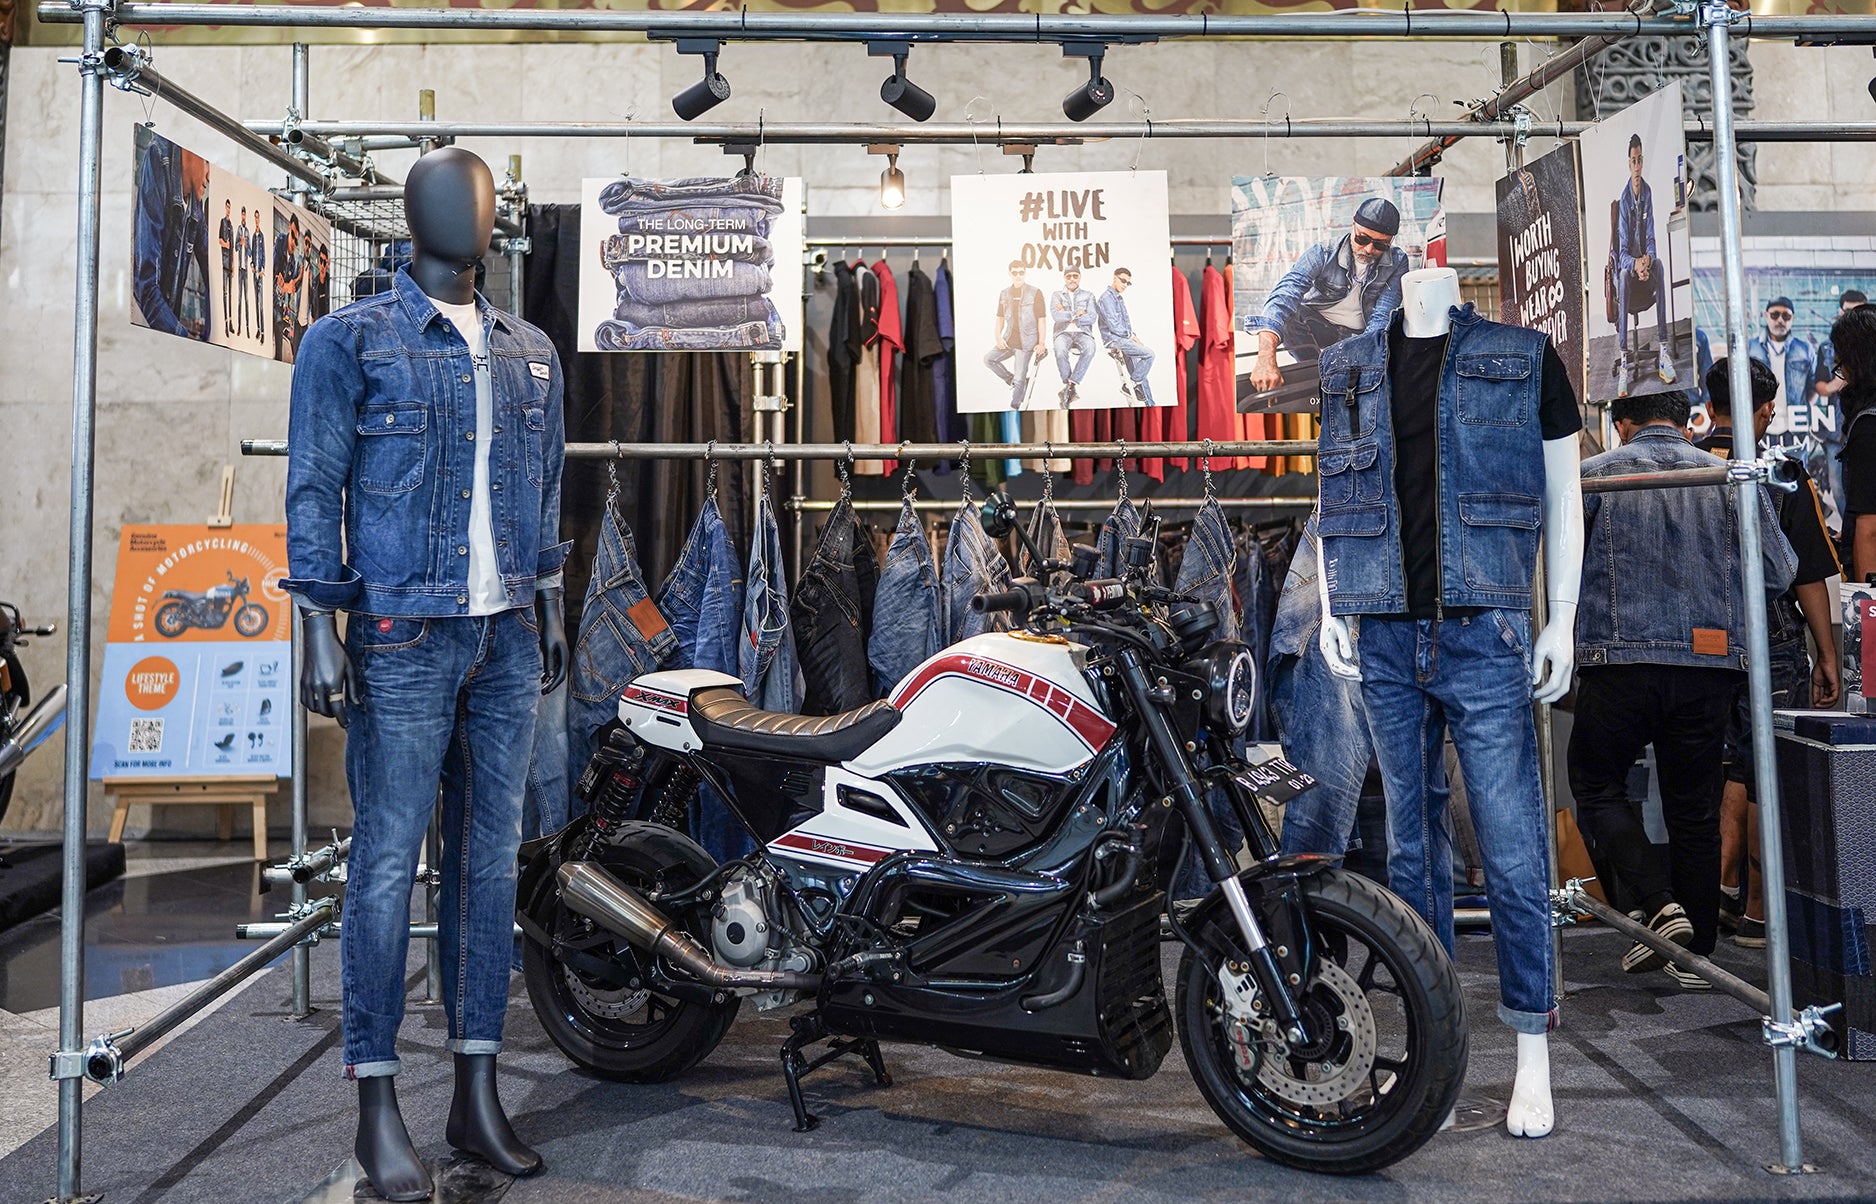 TRULY FASHION INVASION, FROM DENIM TO AUTOMOTIVE